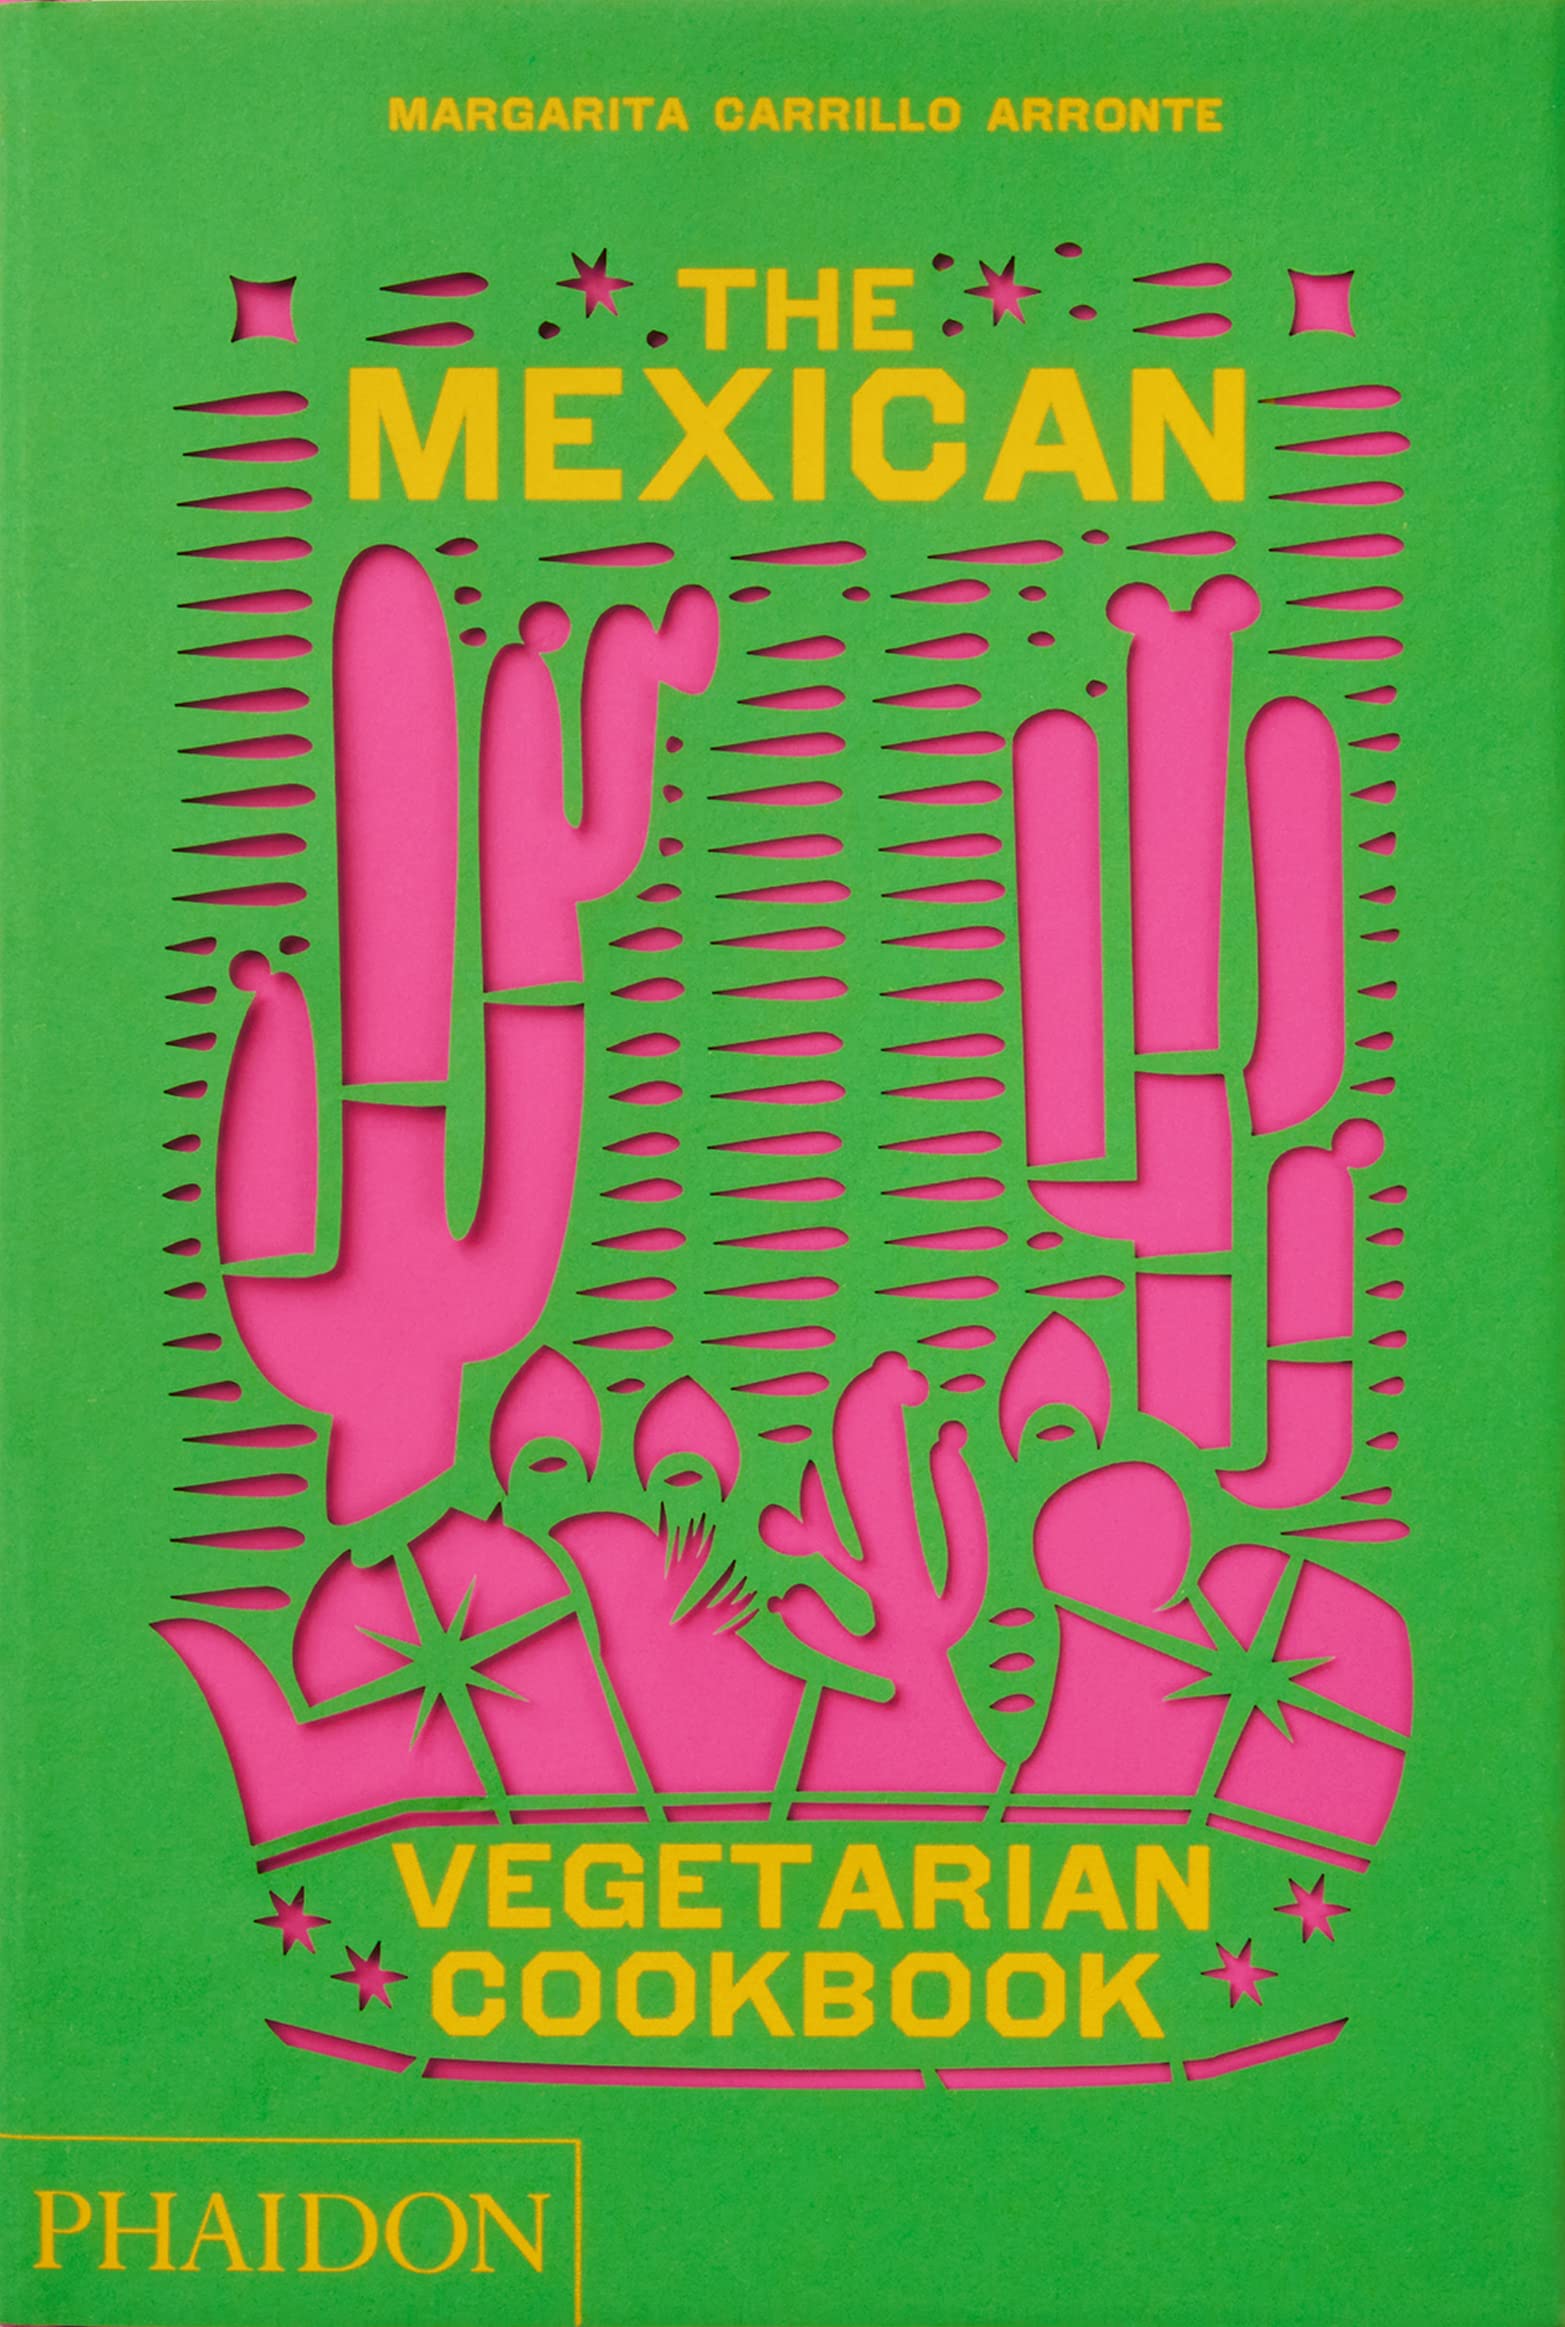 The Mexican Vegetarian Cookbook: 400 authentic everyday recipes for the home cook (Margarita Carrillo Arronte)